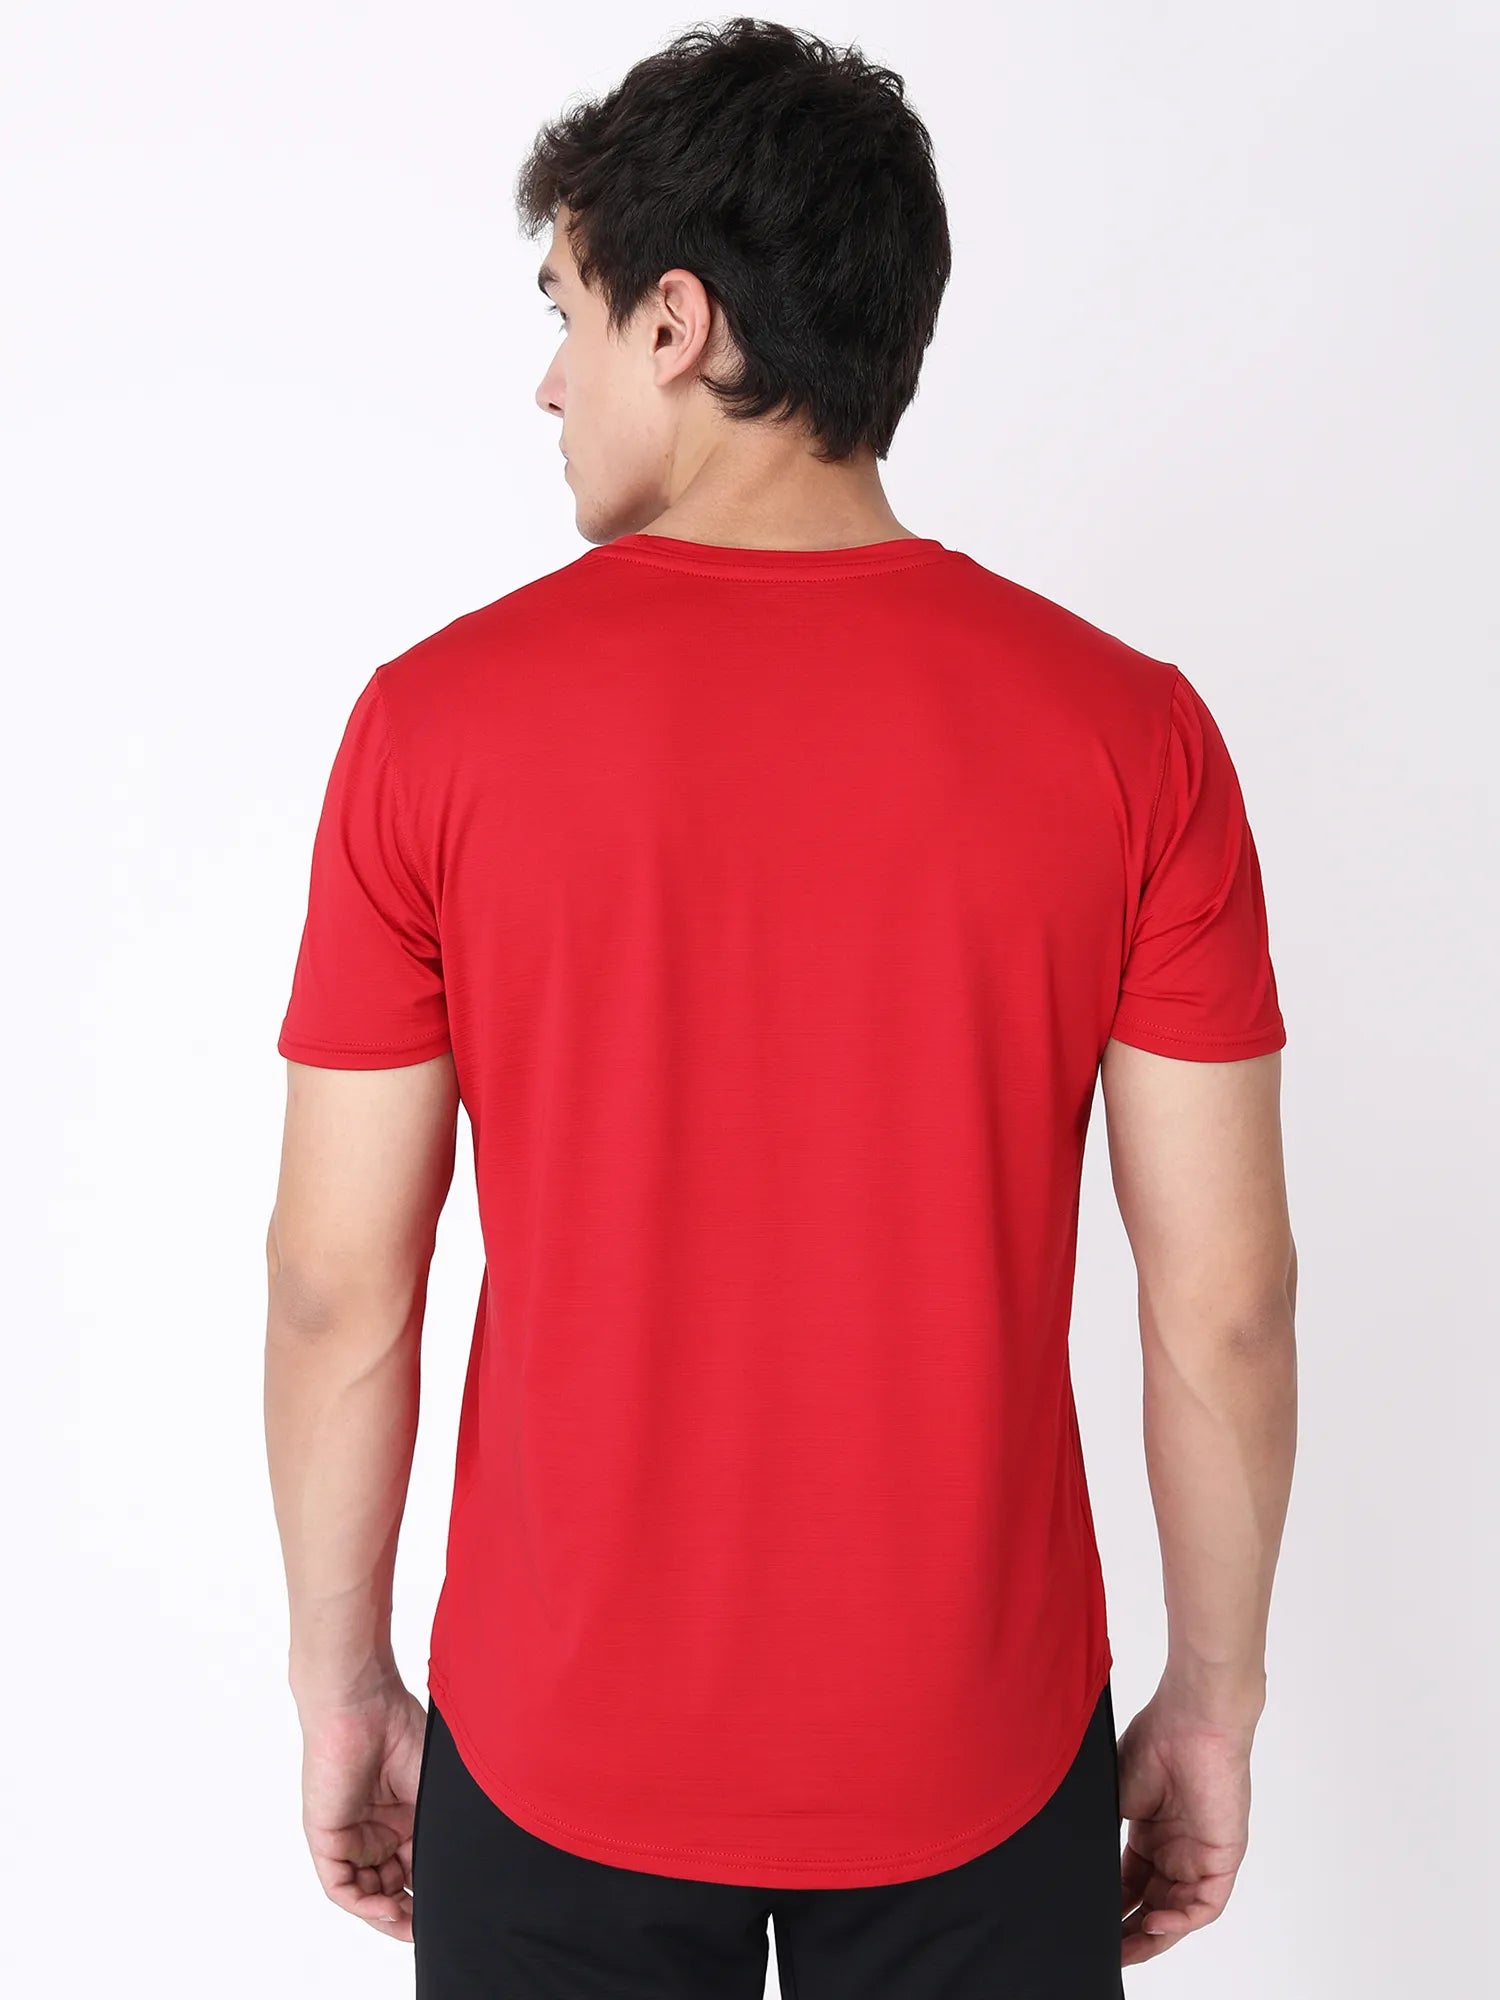 Training T-shirts (Red)